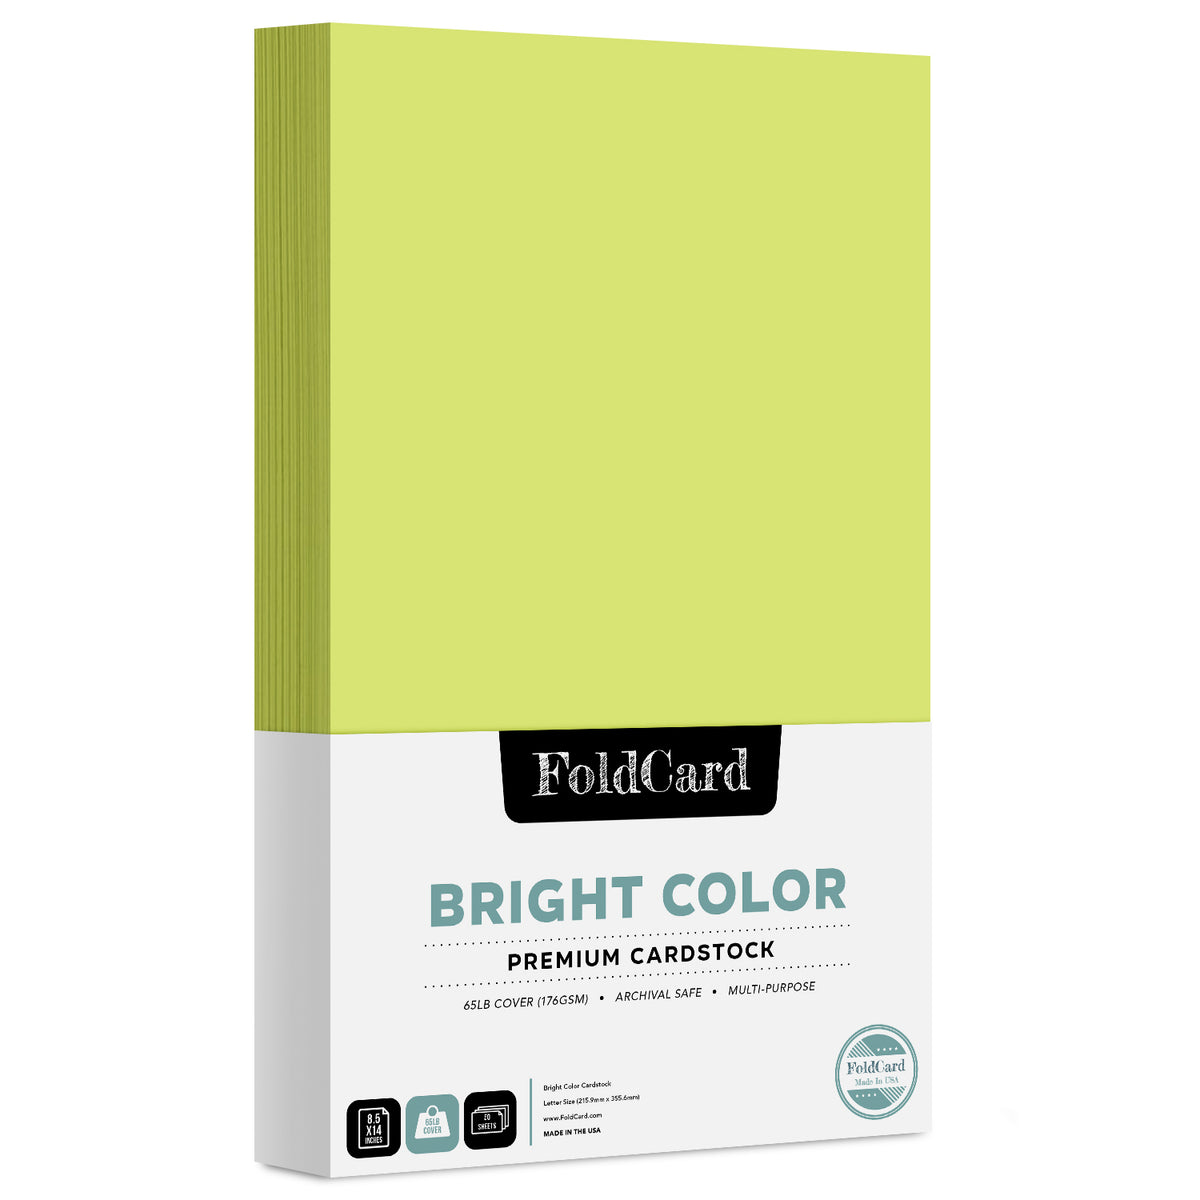 Premium Quality Bright Color Cardstock: 8.5 x 14 - 50 Sheets of 65lb Cover Weight